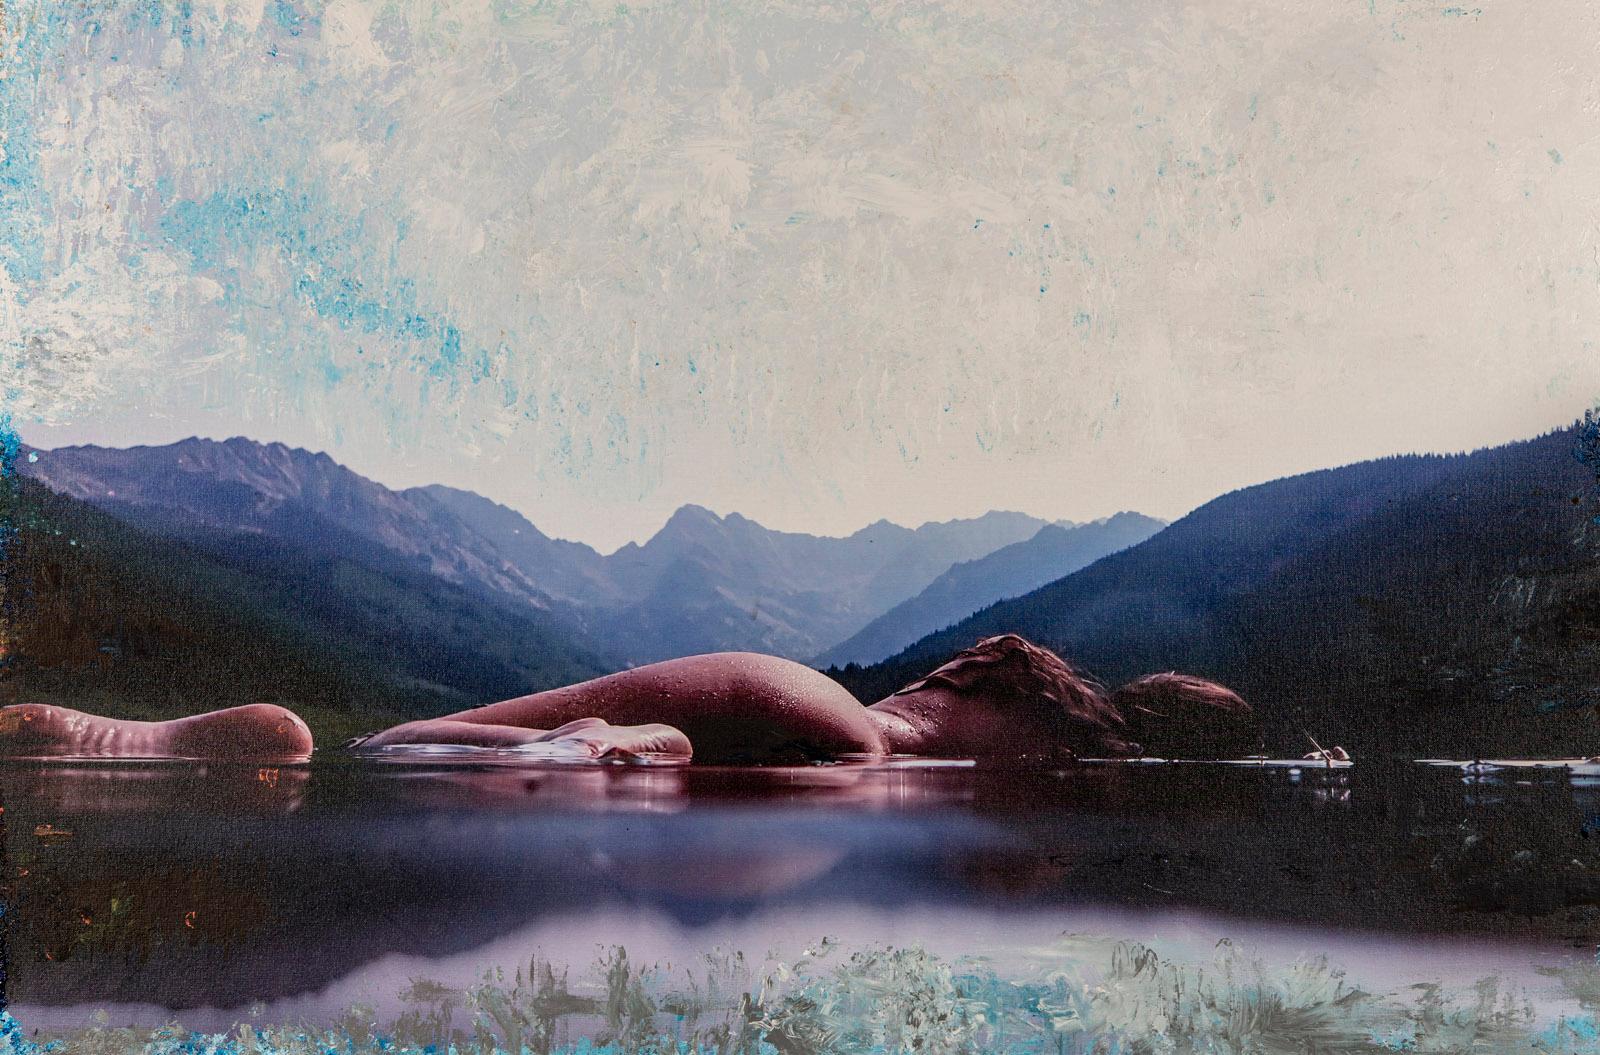 "The Nature of Reality", contemplative fine art nude - Mixed Media Art by Elsa Marie Keefe